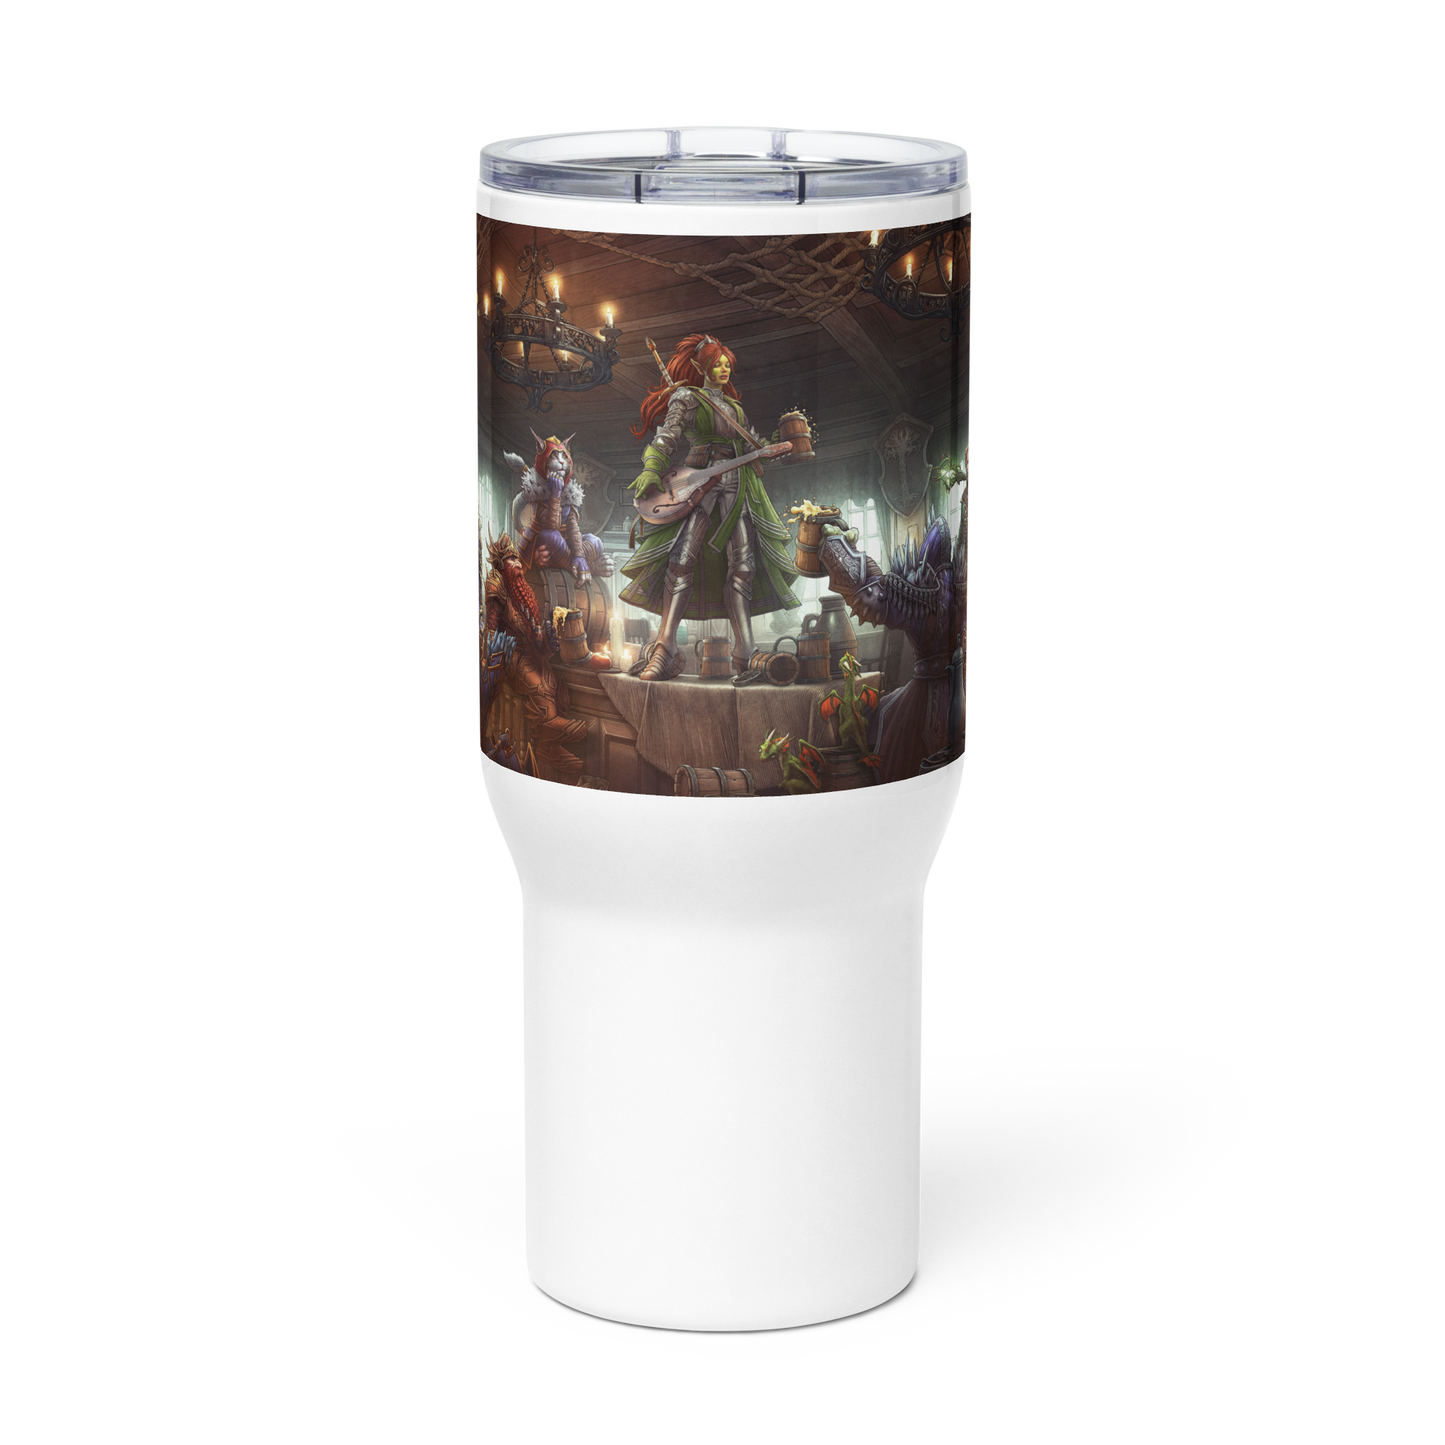 EverQuest® Laurion's Song Travel Mug